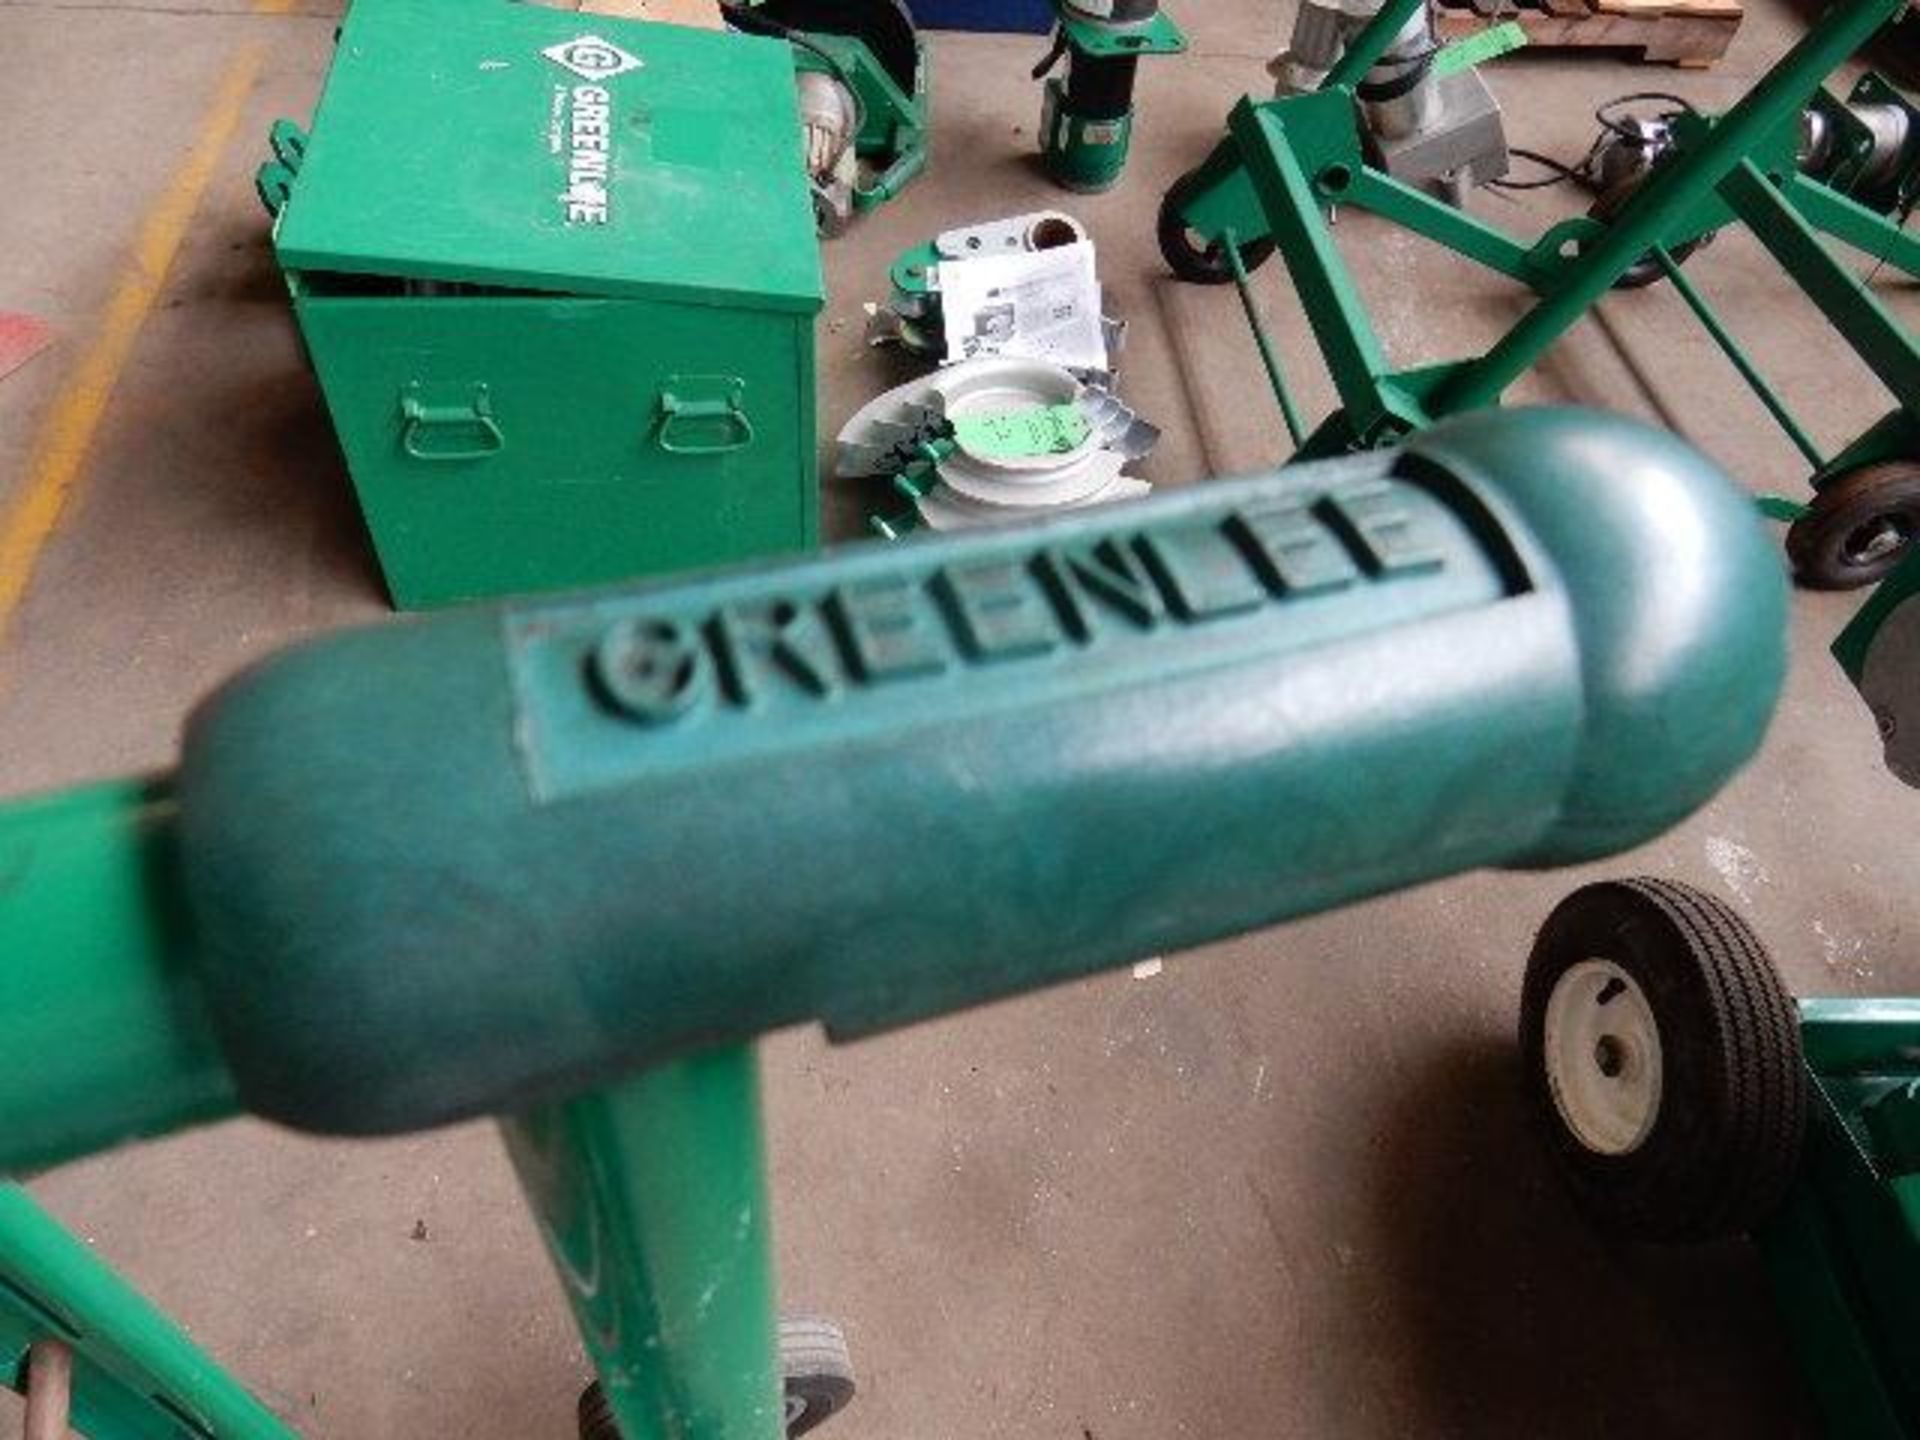 GREENLEE Hand Truck/Wire cart mdl 38733 - Image 5 of 5